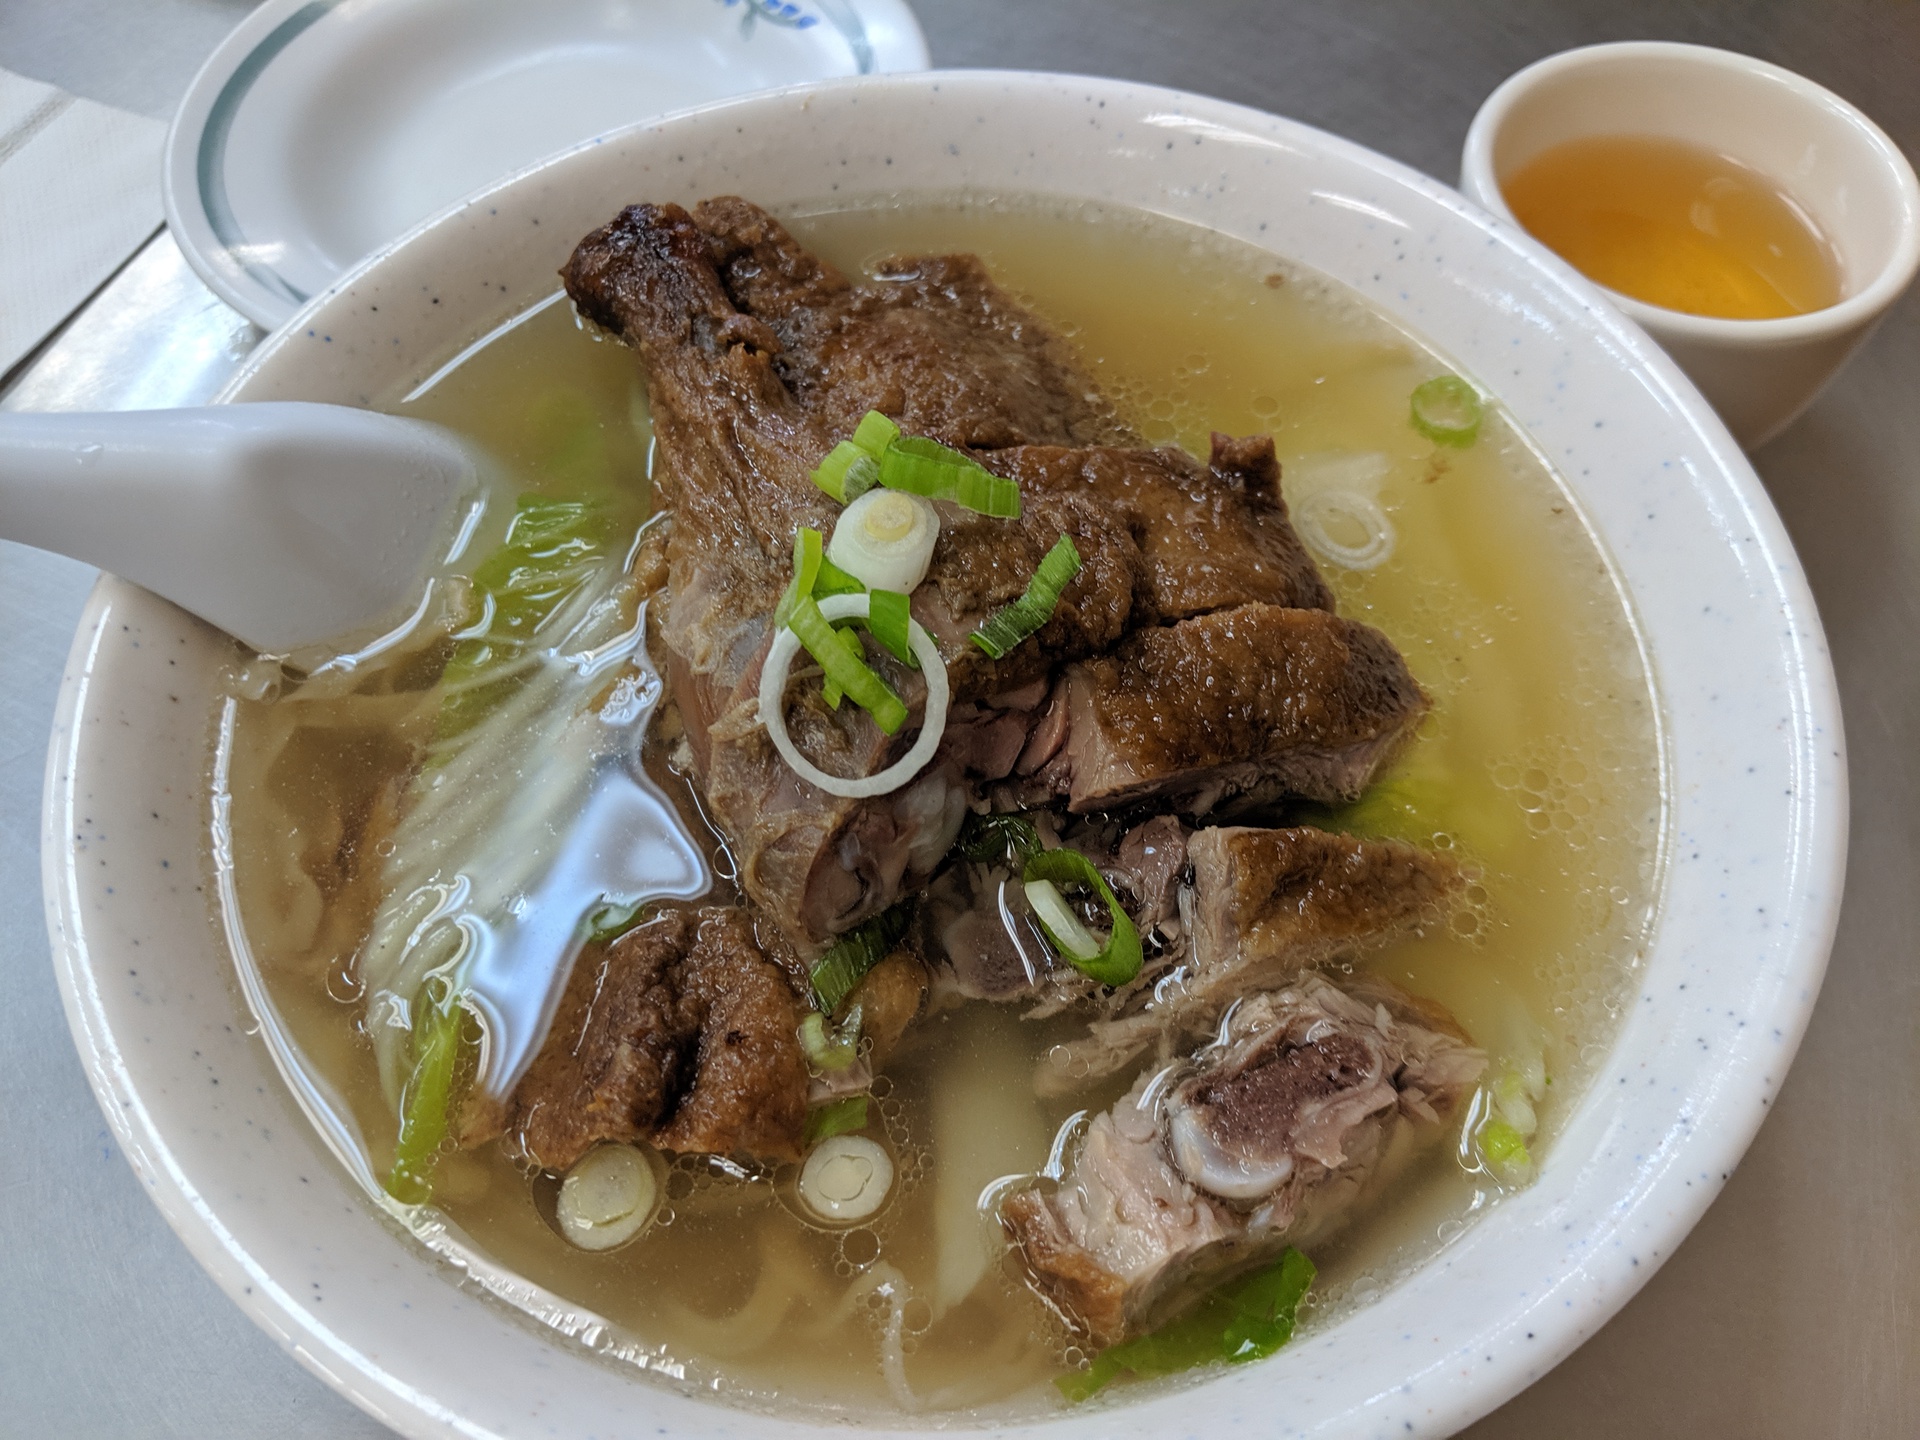 Oakland's Chinatown serves up favorites like this Bowl of Fo, fish dishes, salads, and noodles and from the Vien Huong Vietnamese restaurant